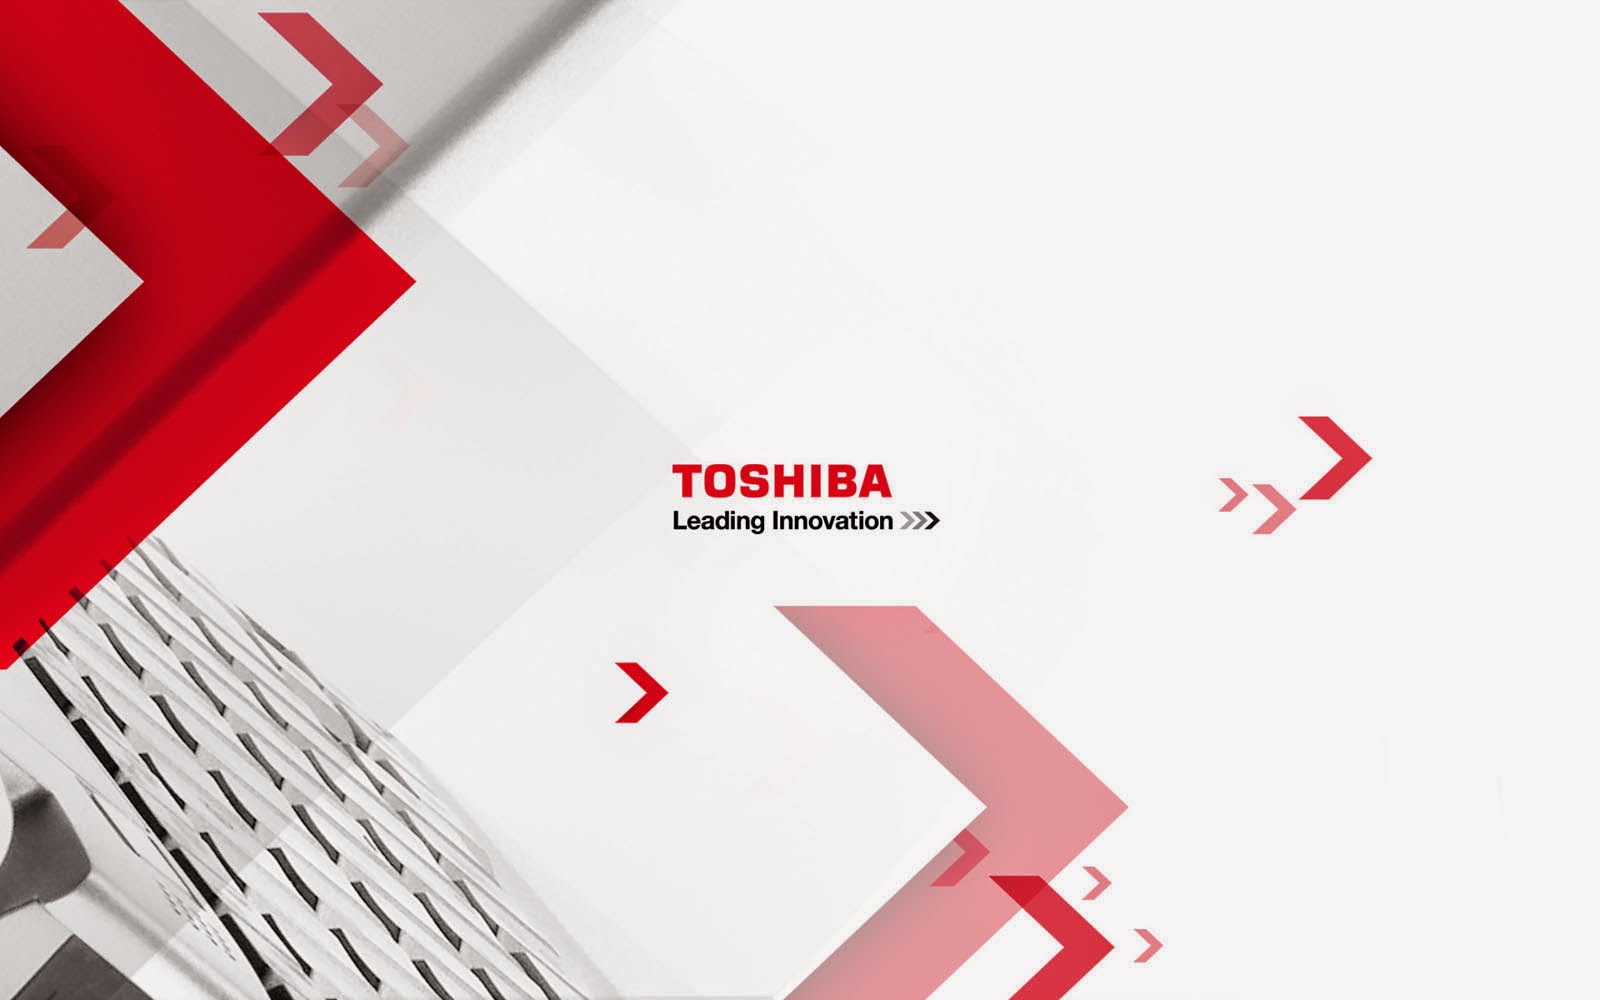 Toshiba Wallpaper And Pictures